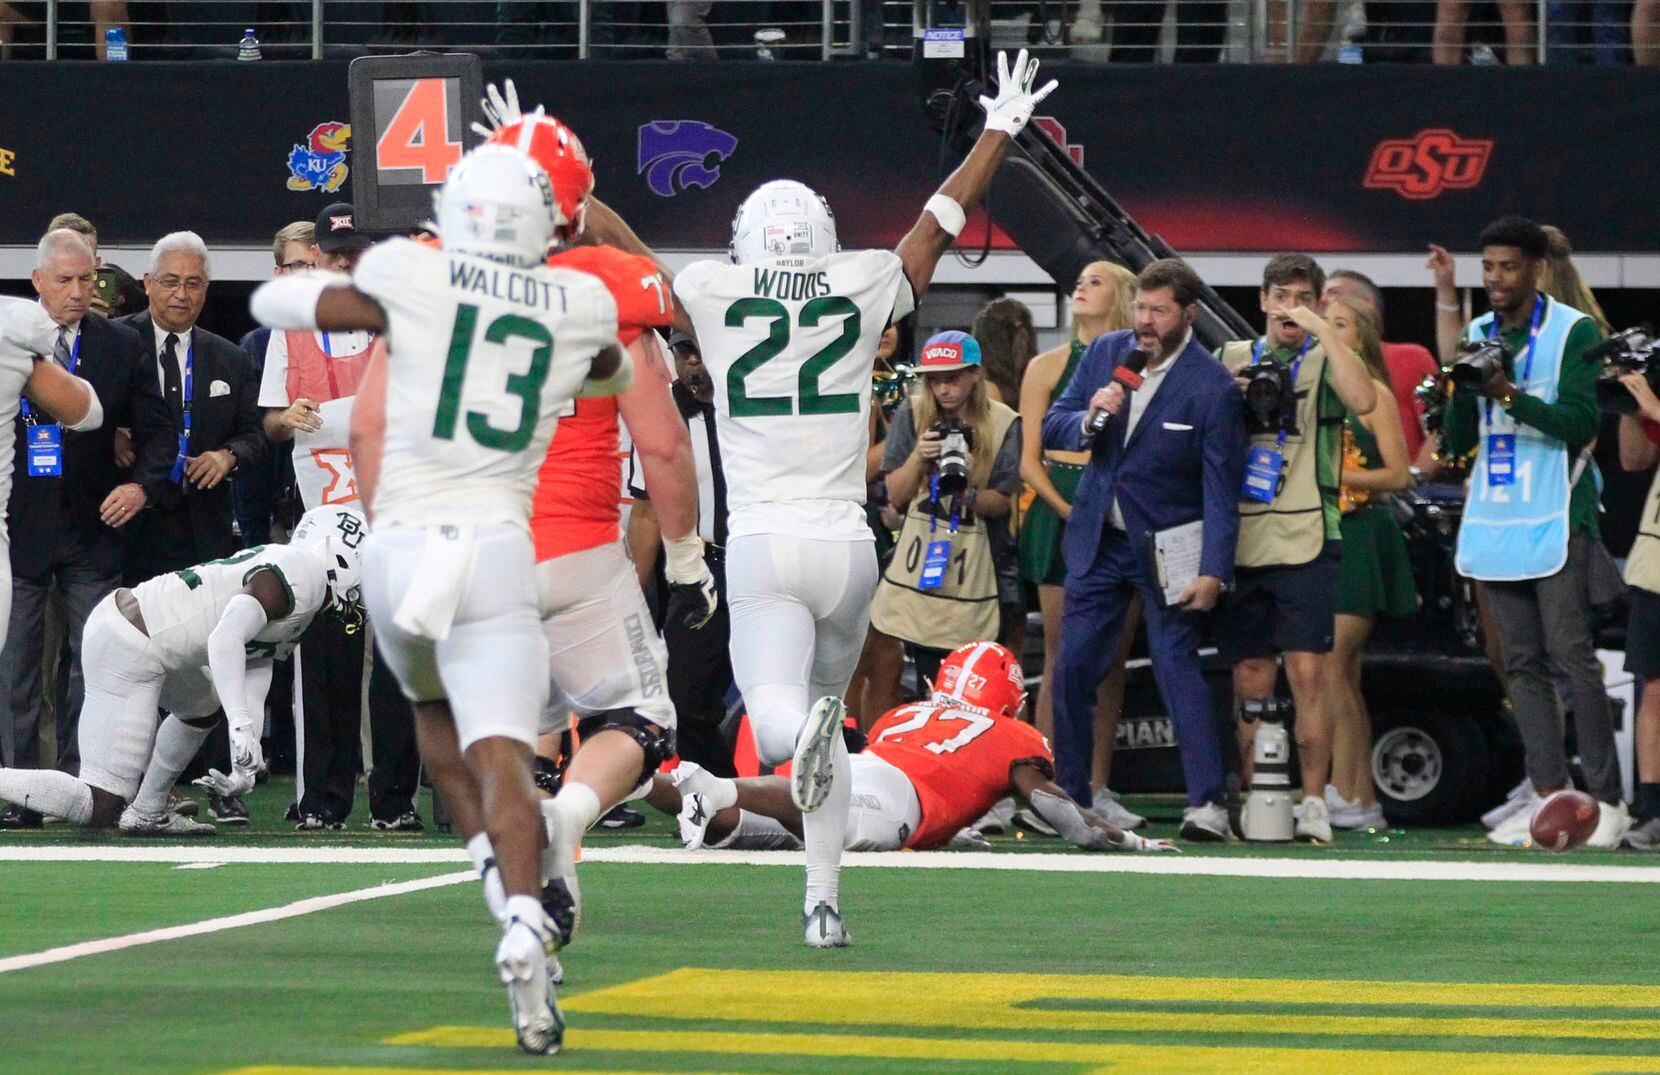 The football rolls away, and Baylor Bears safety JT Woods (22) celebrates, as Oklahoma State Cowboys running back Dezmon Jackson, on ground, fails to get into the end zone on fourth at the end of the game in the Big 12 Championship football game at AT&T Stadium in Arlington on Saturday, December 4, 2021. Baylor won 21-16. (John F. Rhodes / Special Contributor)